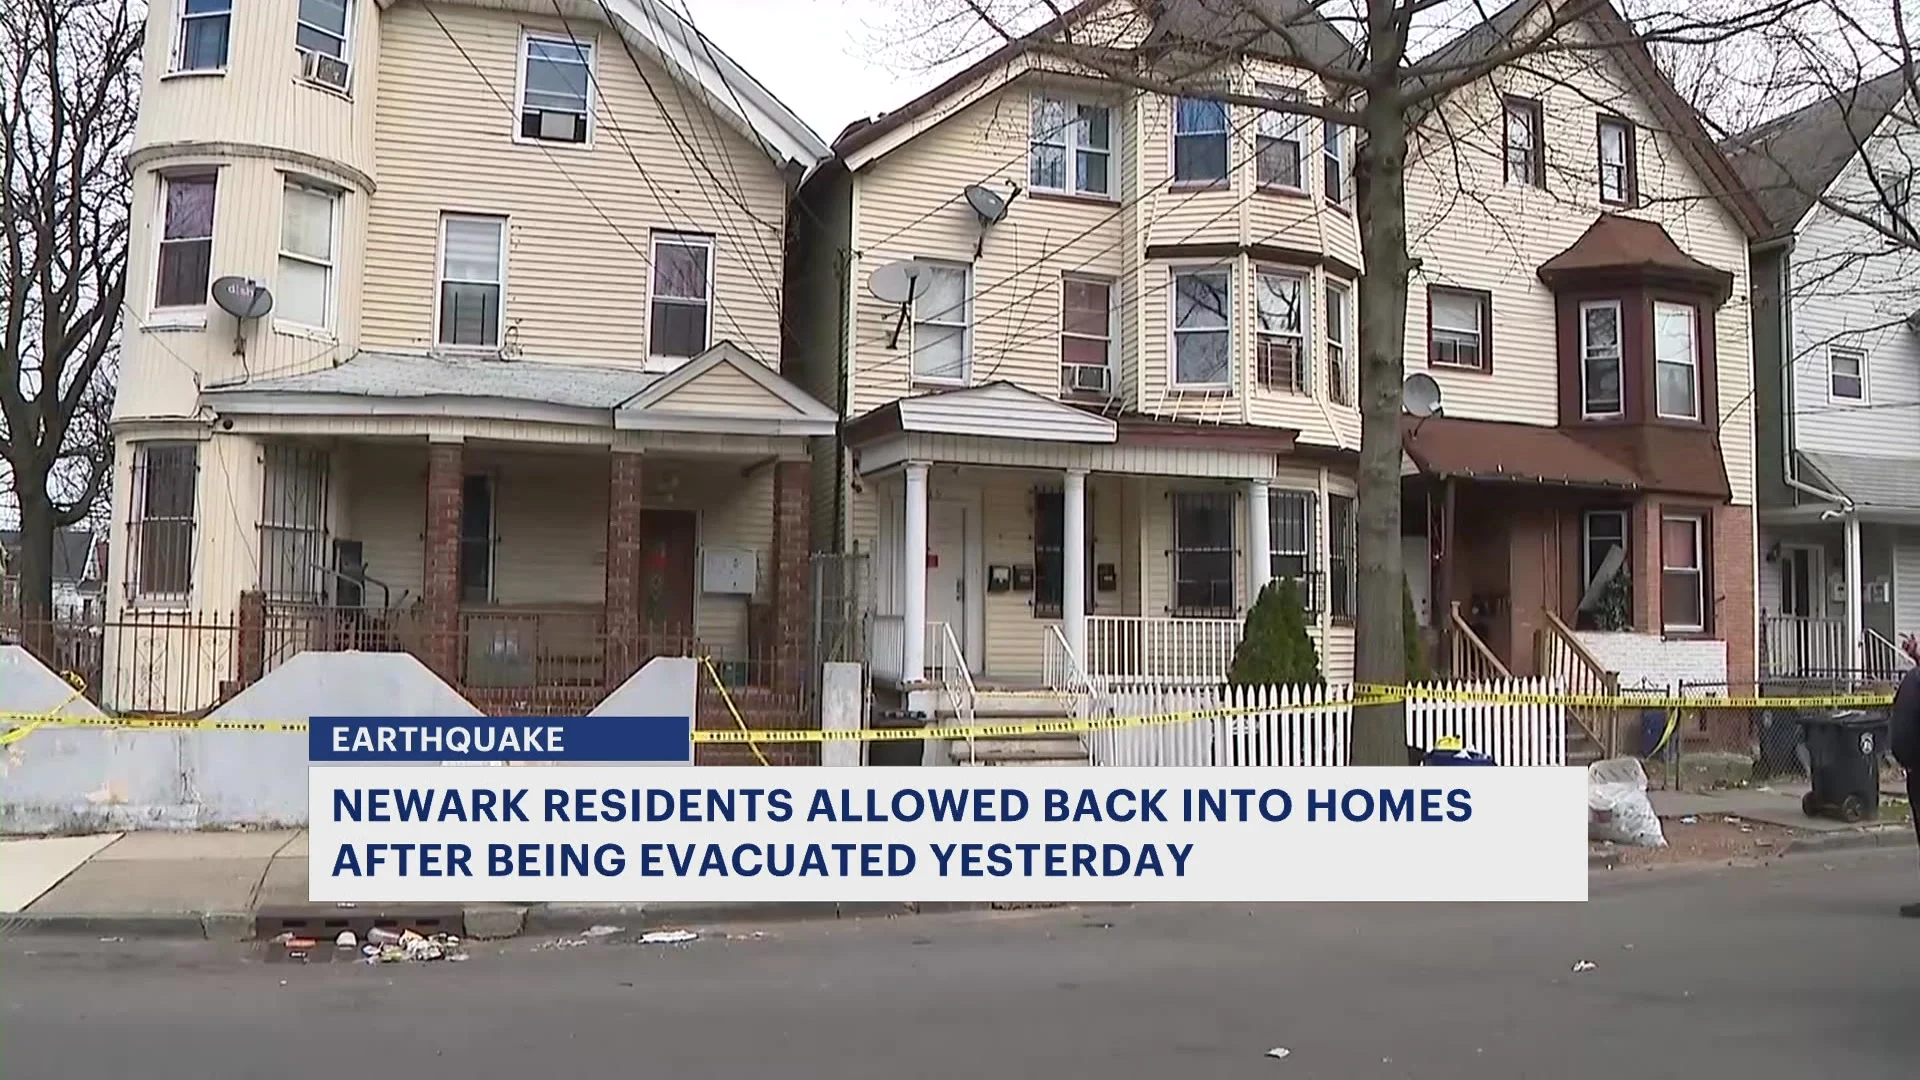 Mayor's office: Residents return to Newark homes damaged by earthquake